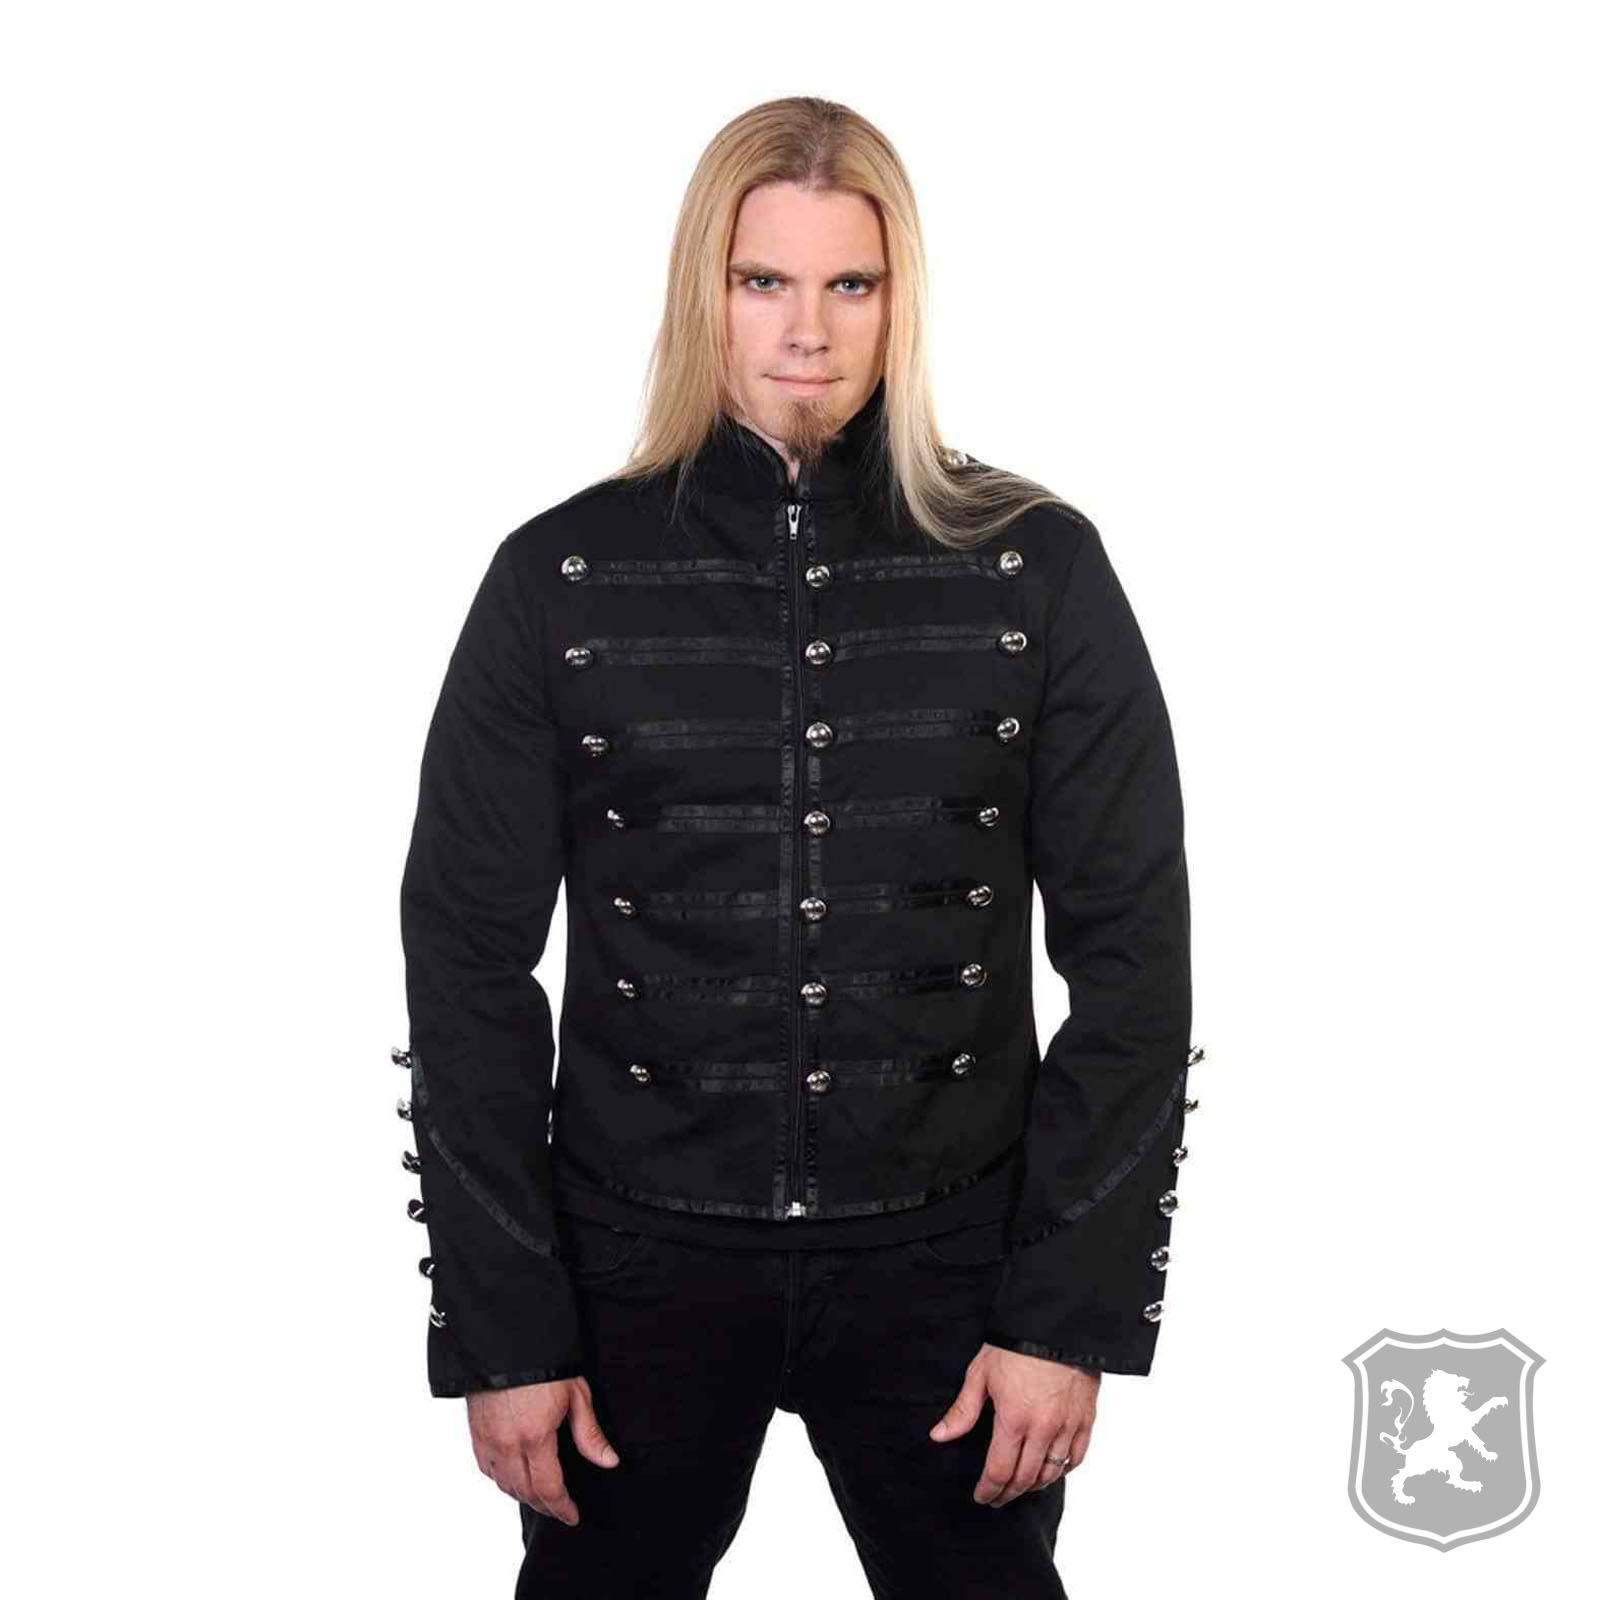 Men Military Parade Marching Drummer Jacket Gothic Army Band Jacket